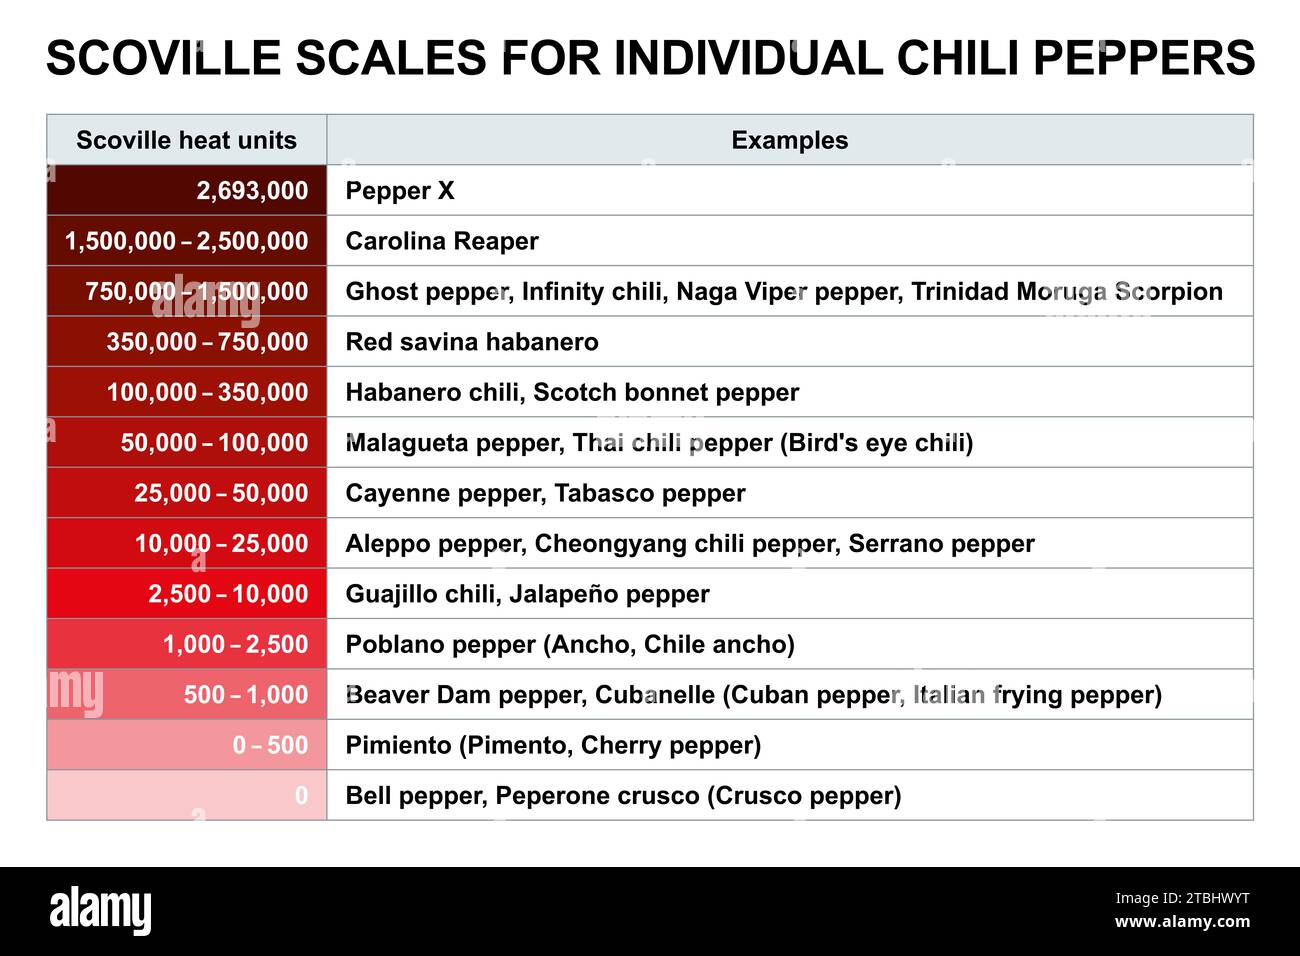 Scoville scale for the parental lines and hybrids cultivated in